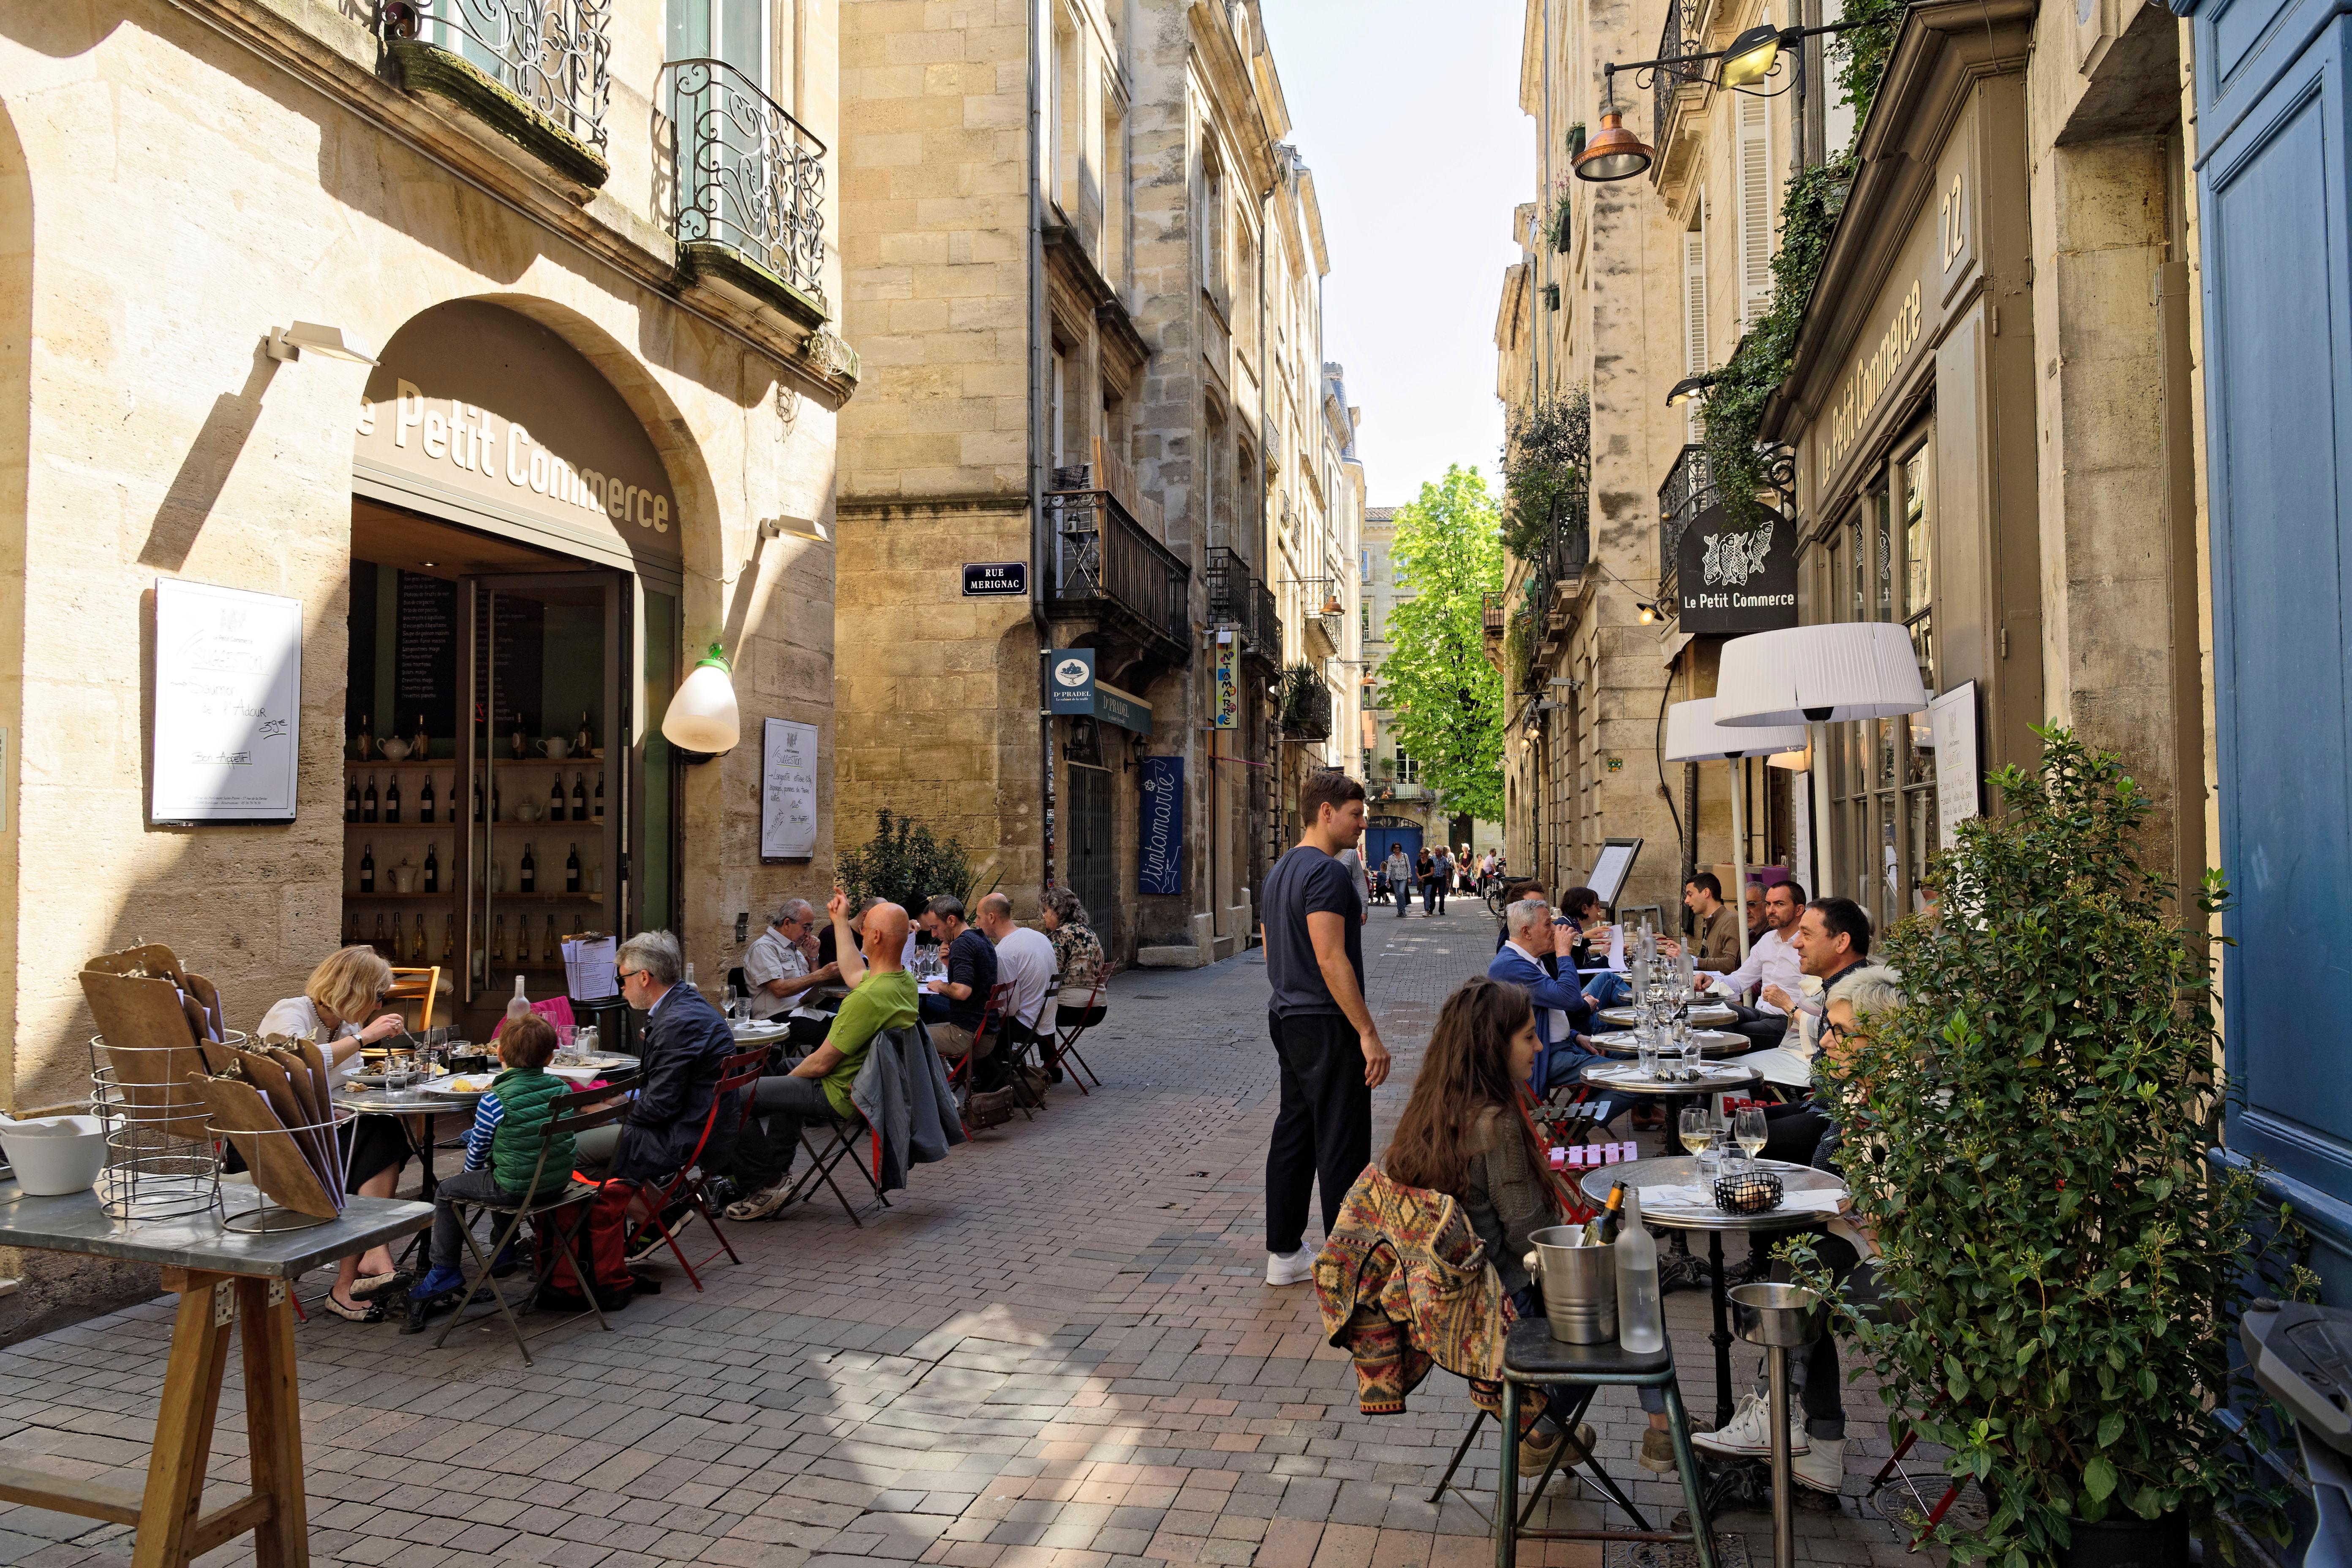 20 Best Cities in France - PlanetWare